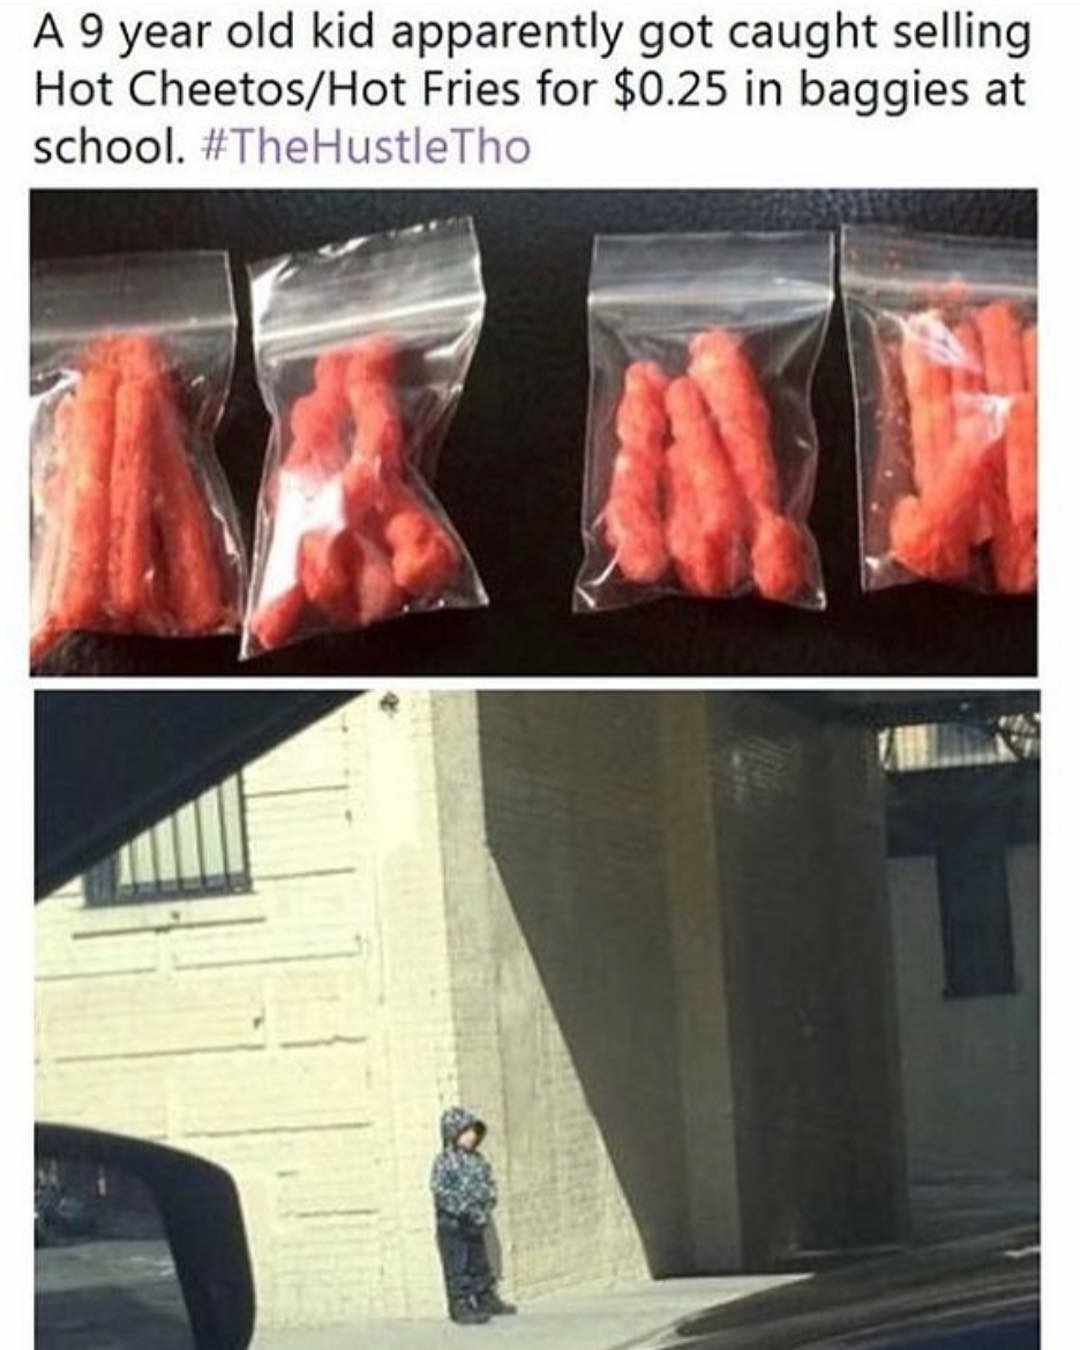 kid selling cheetos - A 9 year old kid apparently got caught selling Hot CheetosHot Fries for $0.25 in baggies at school. Tho